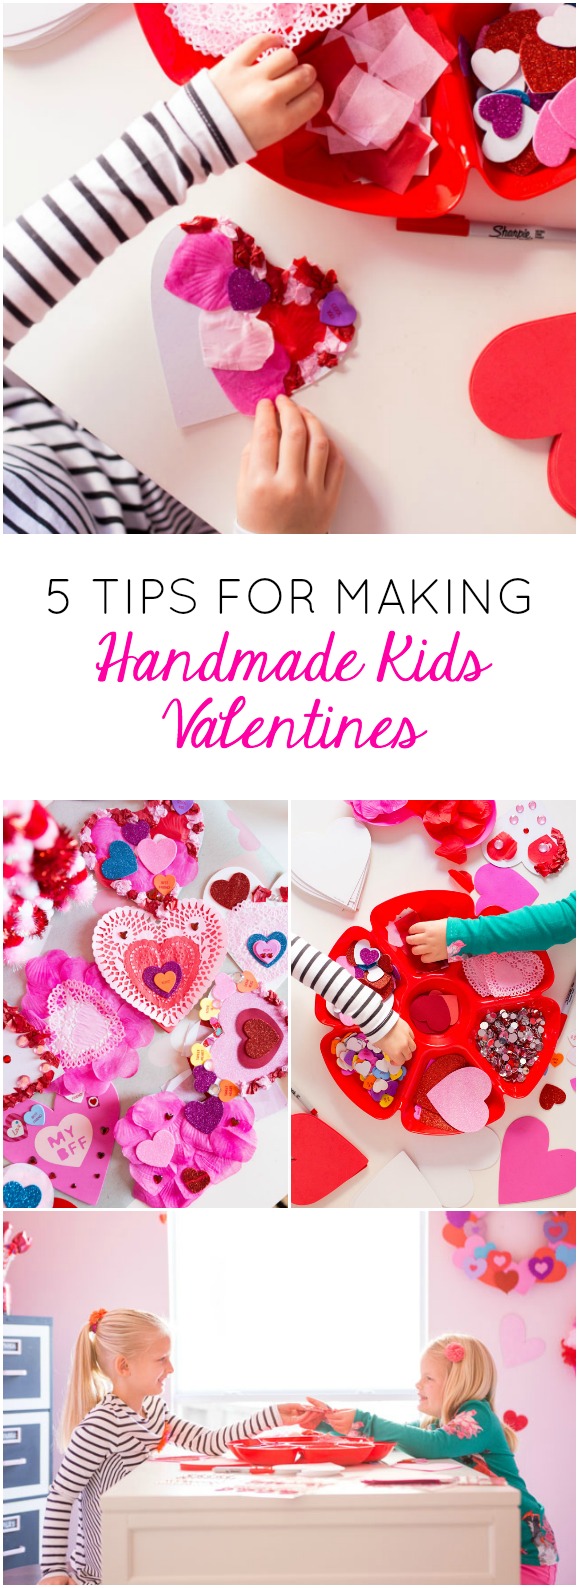 Have fun making easy handmade valentine cards with your kids this year!